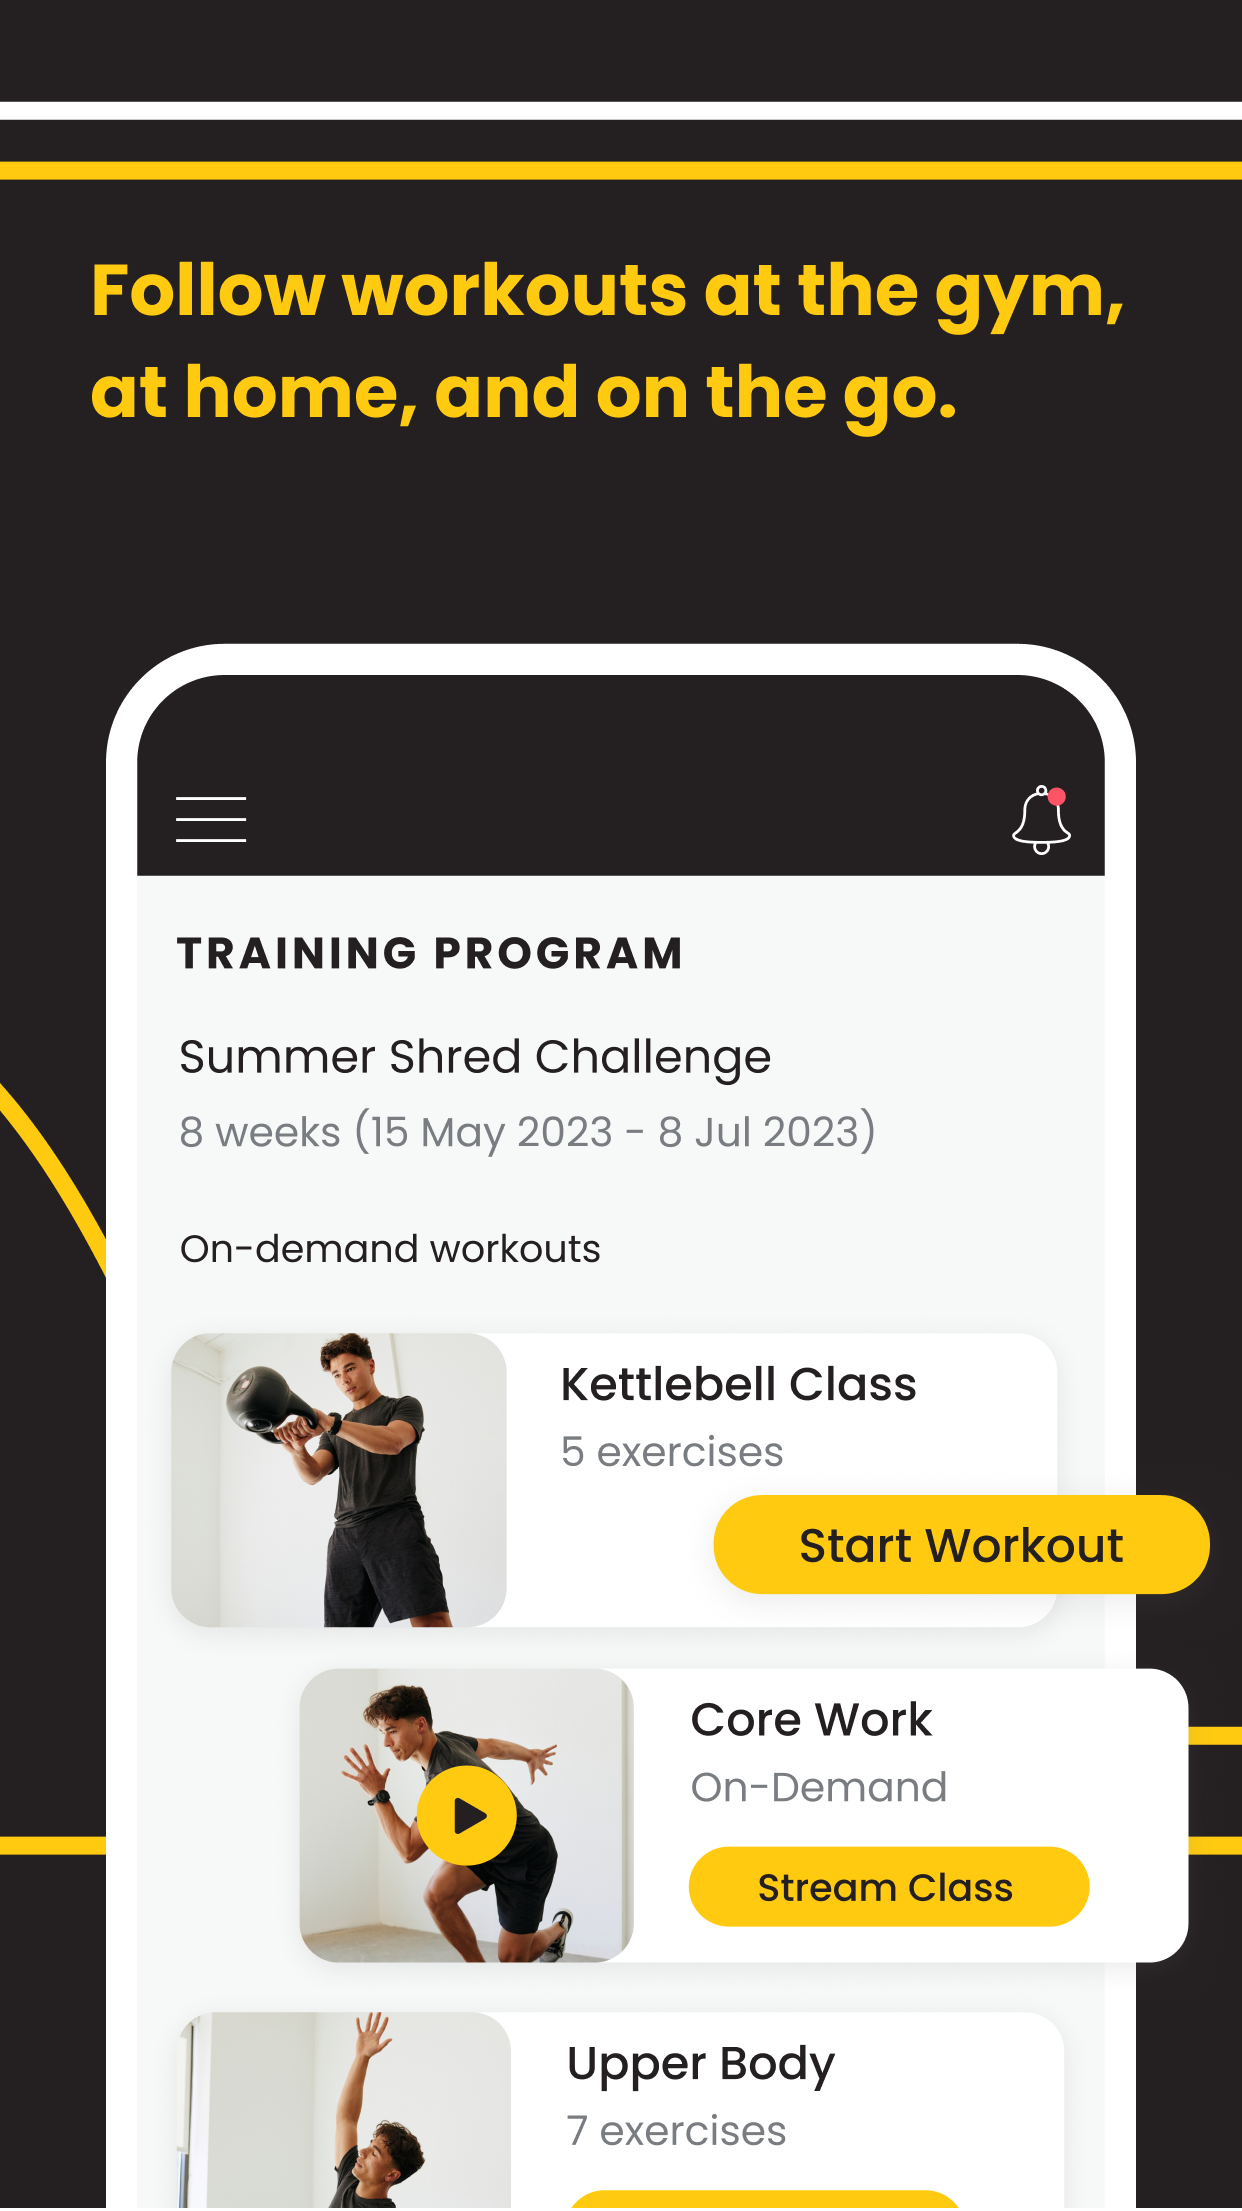 ABC Trainerize: The Total Gym Management Software. This revolutionary application is tailored for gyms, studios, personal trainers, and other fitness professionals to help grow and manage their business.